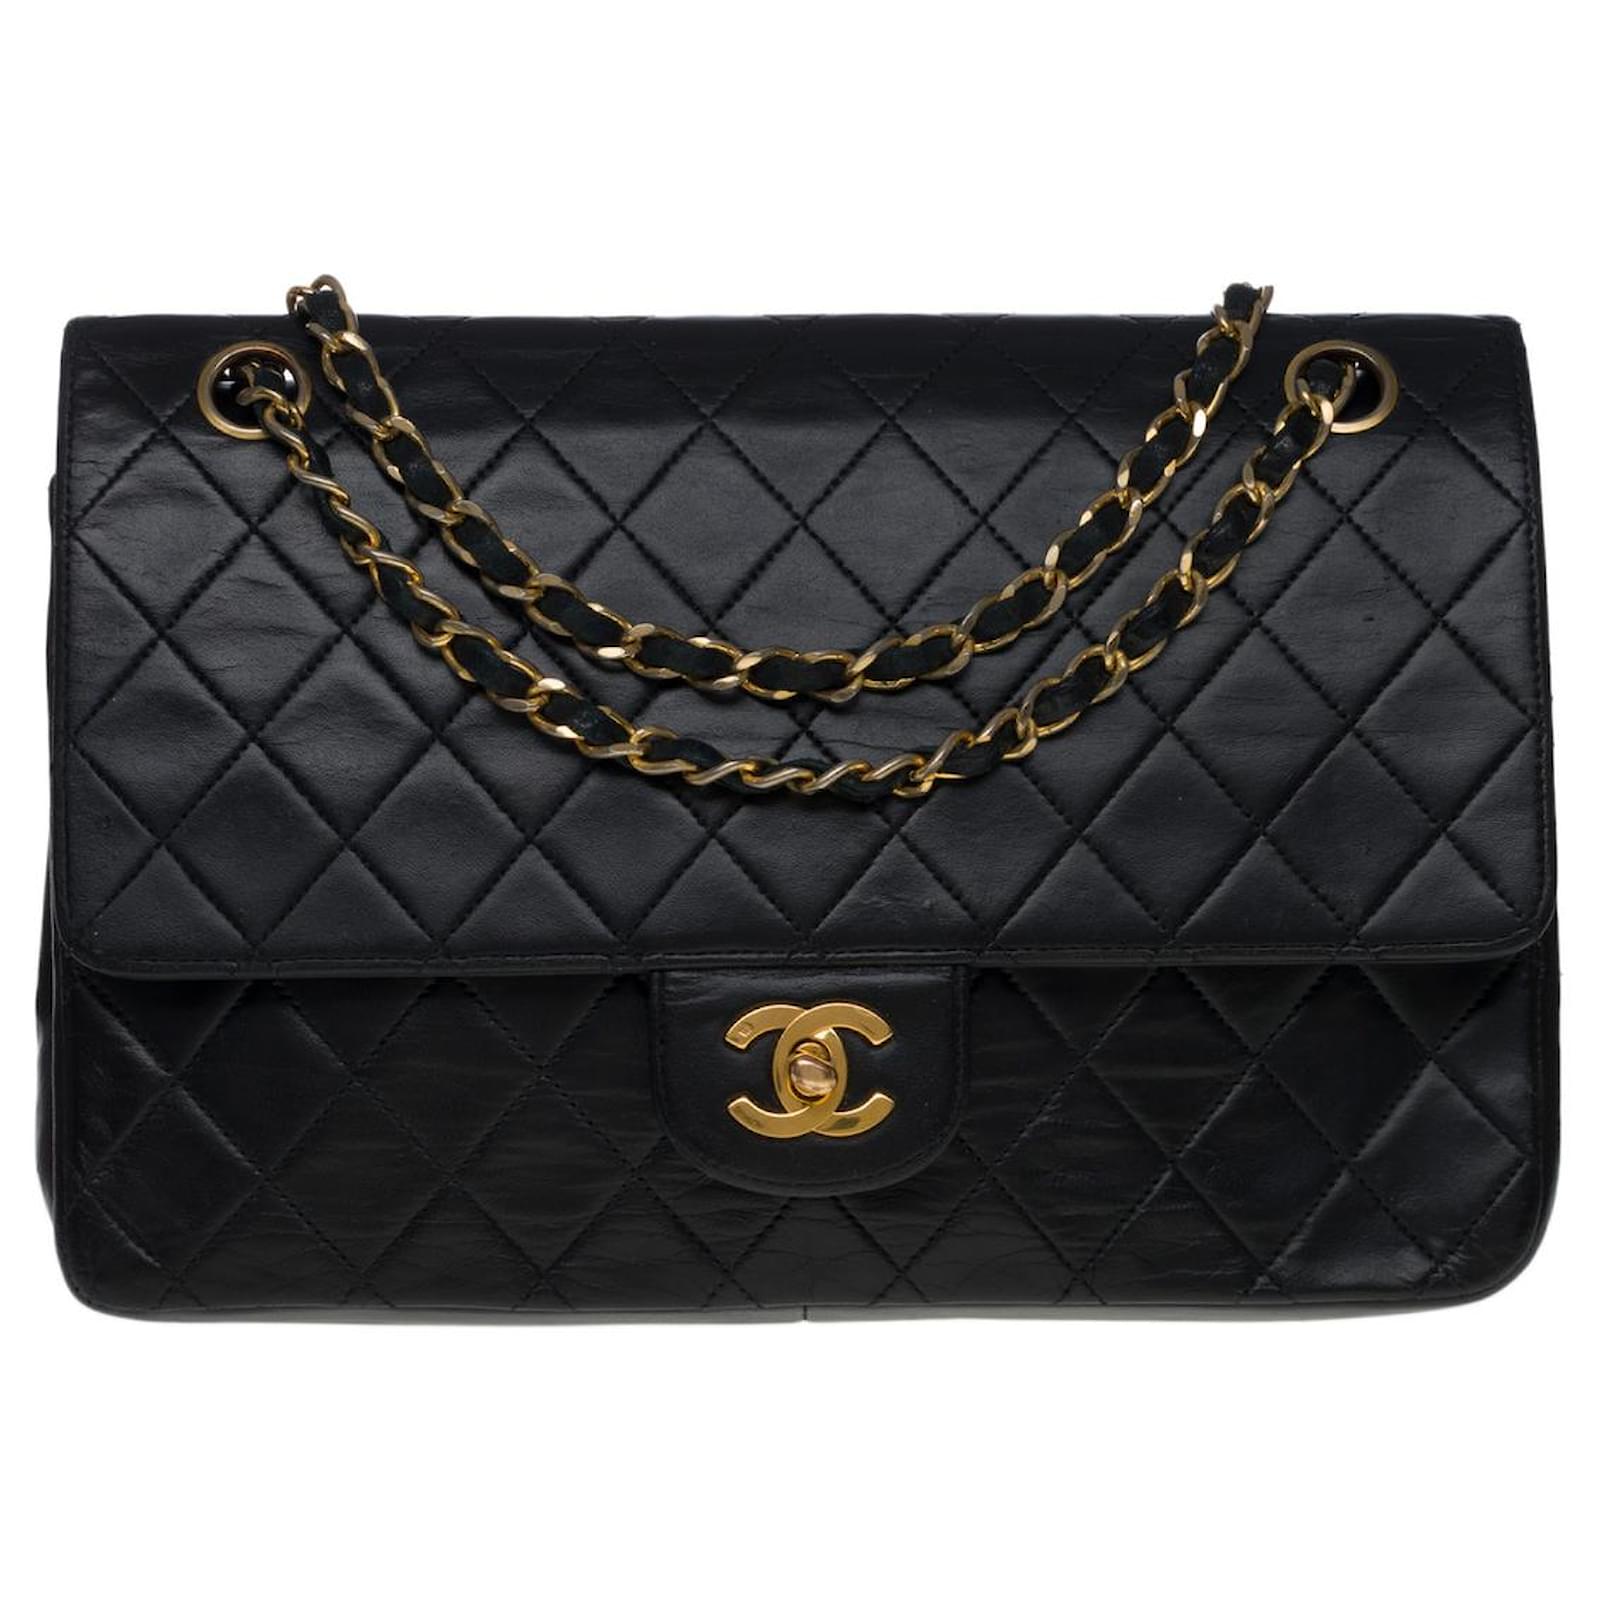 Handbags Chanel Chanel Timeless Shoulder bag/CLASSIC Lined Flap in Black Quilted Lamb LEATHER-100584